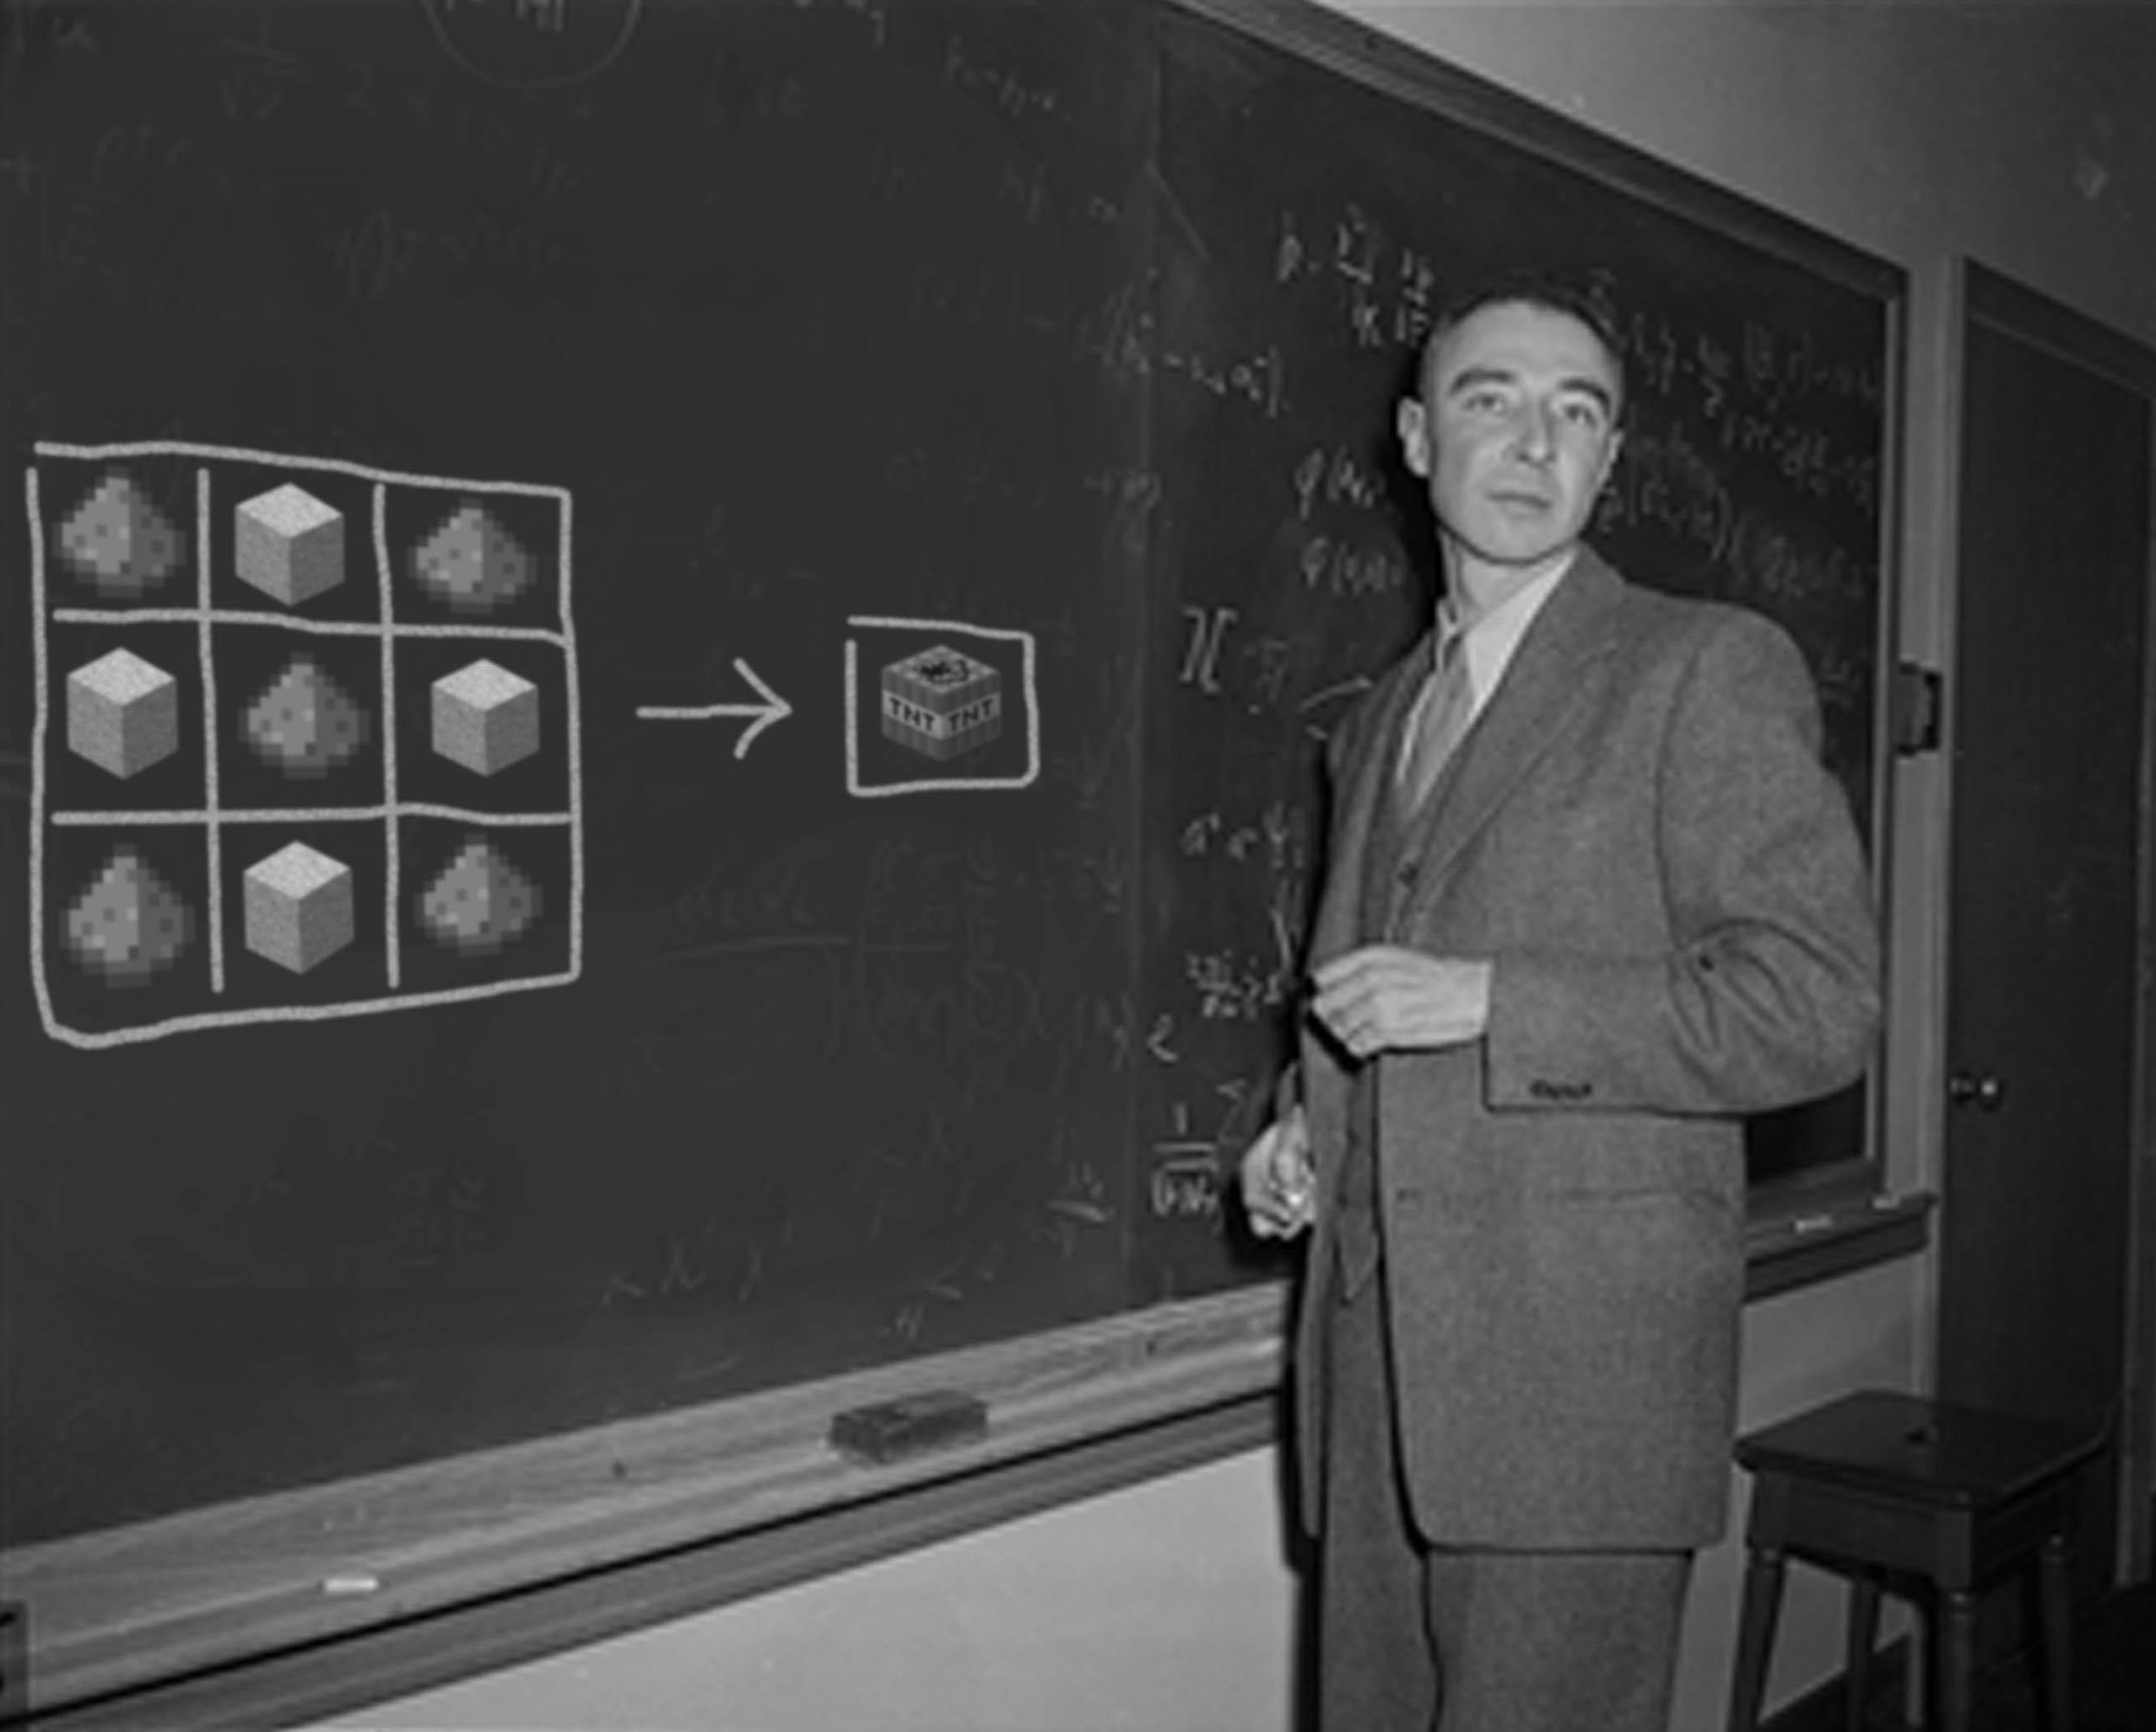 Picture of J. Robert Oppenheimer taken as he completed the final design of the atomic bomb.